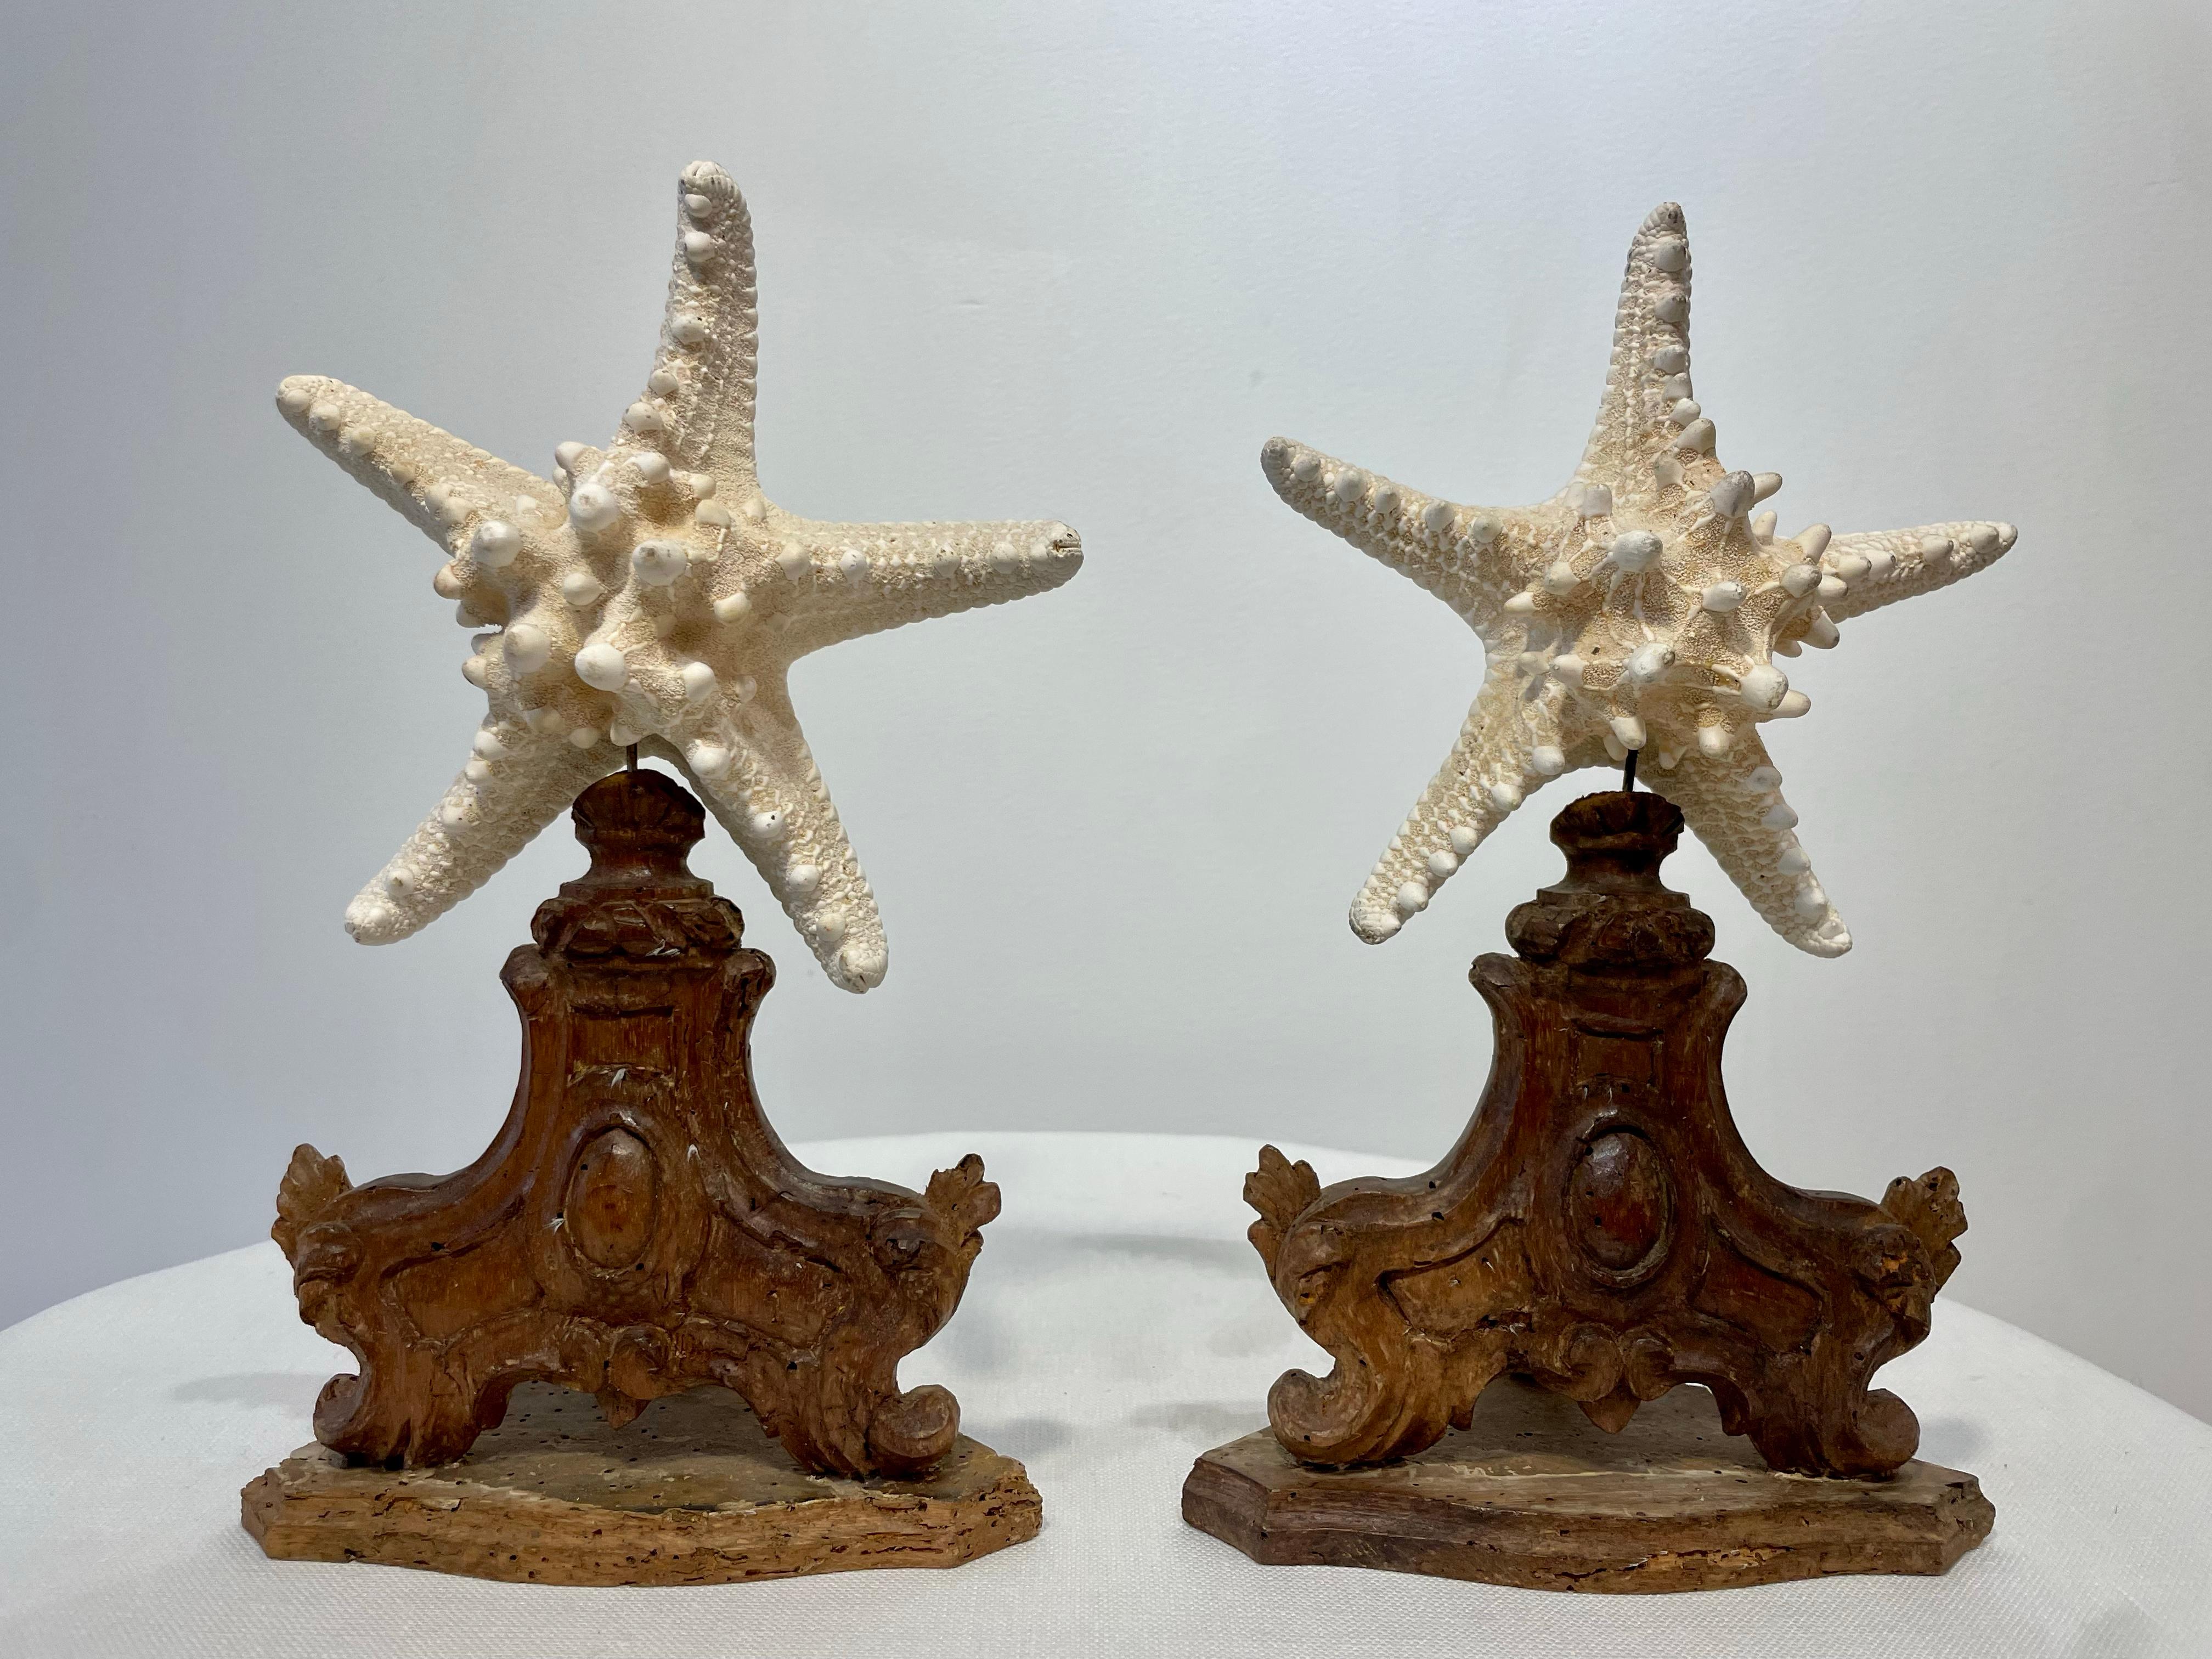 Antique Italian carved olive wood Rococo style stands holding starfish specimens. The bases are 19th century, circa 1880. Starfish are recent additions sourced from Sicily.